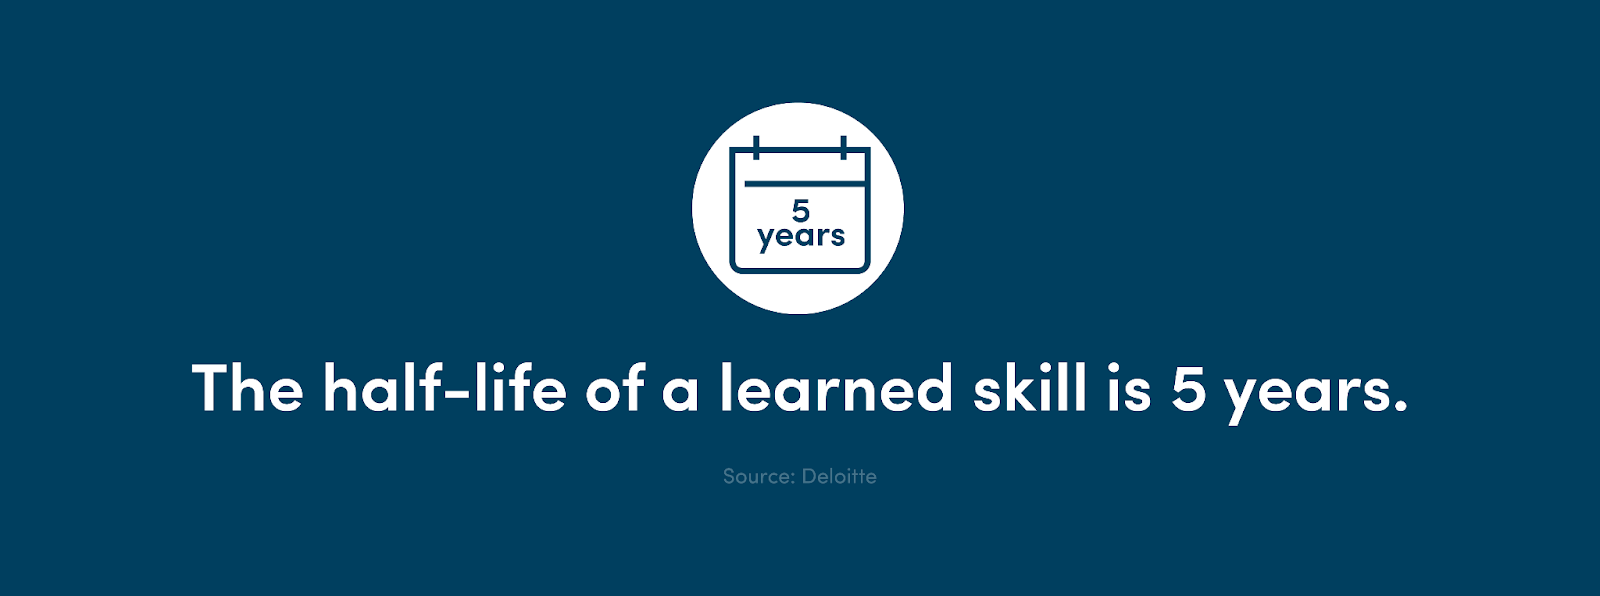 The half-life of a learned skill is 5 years. 